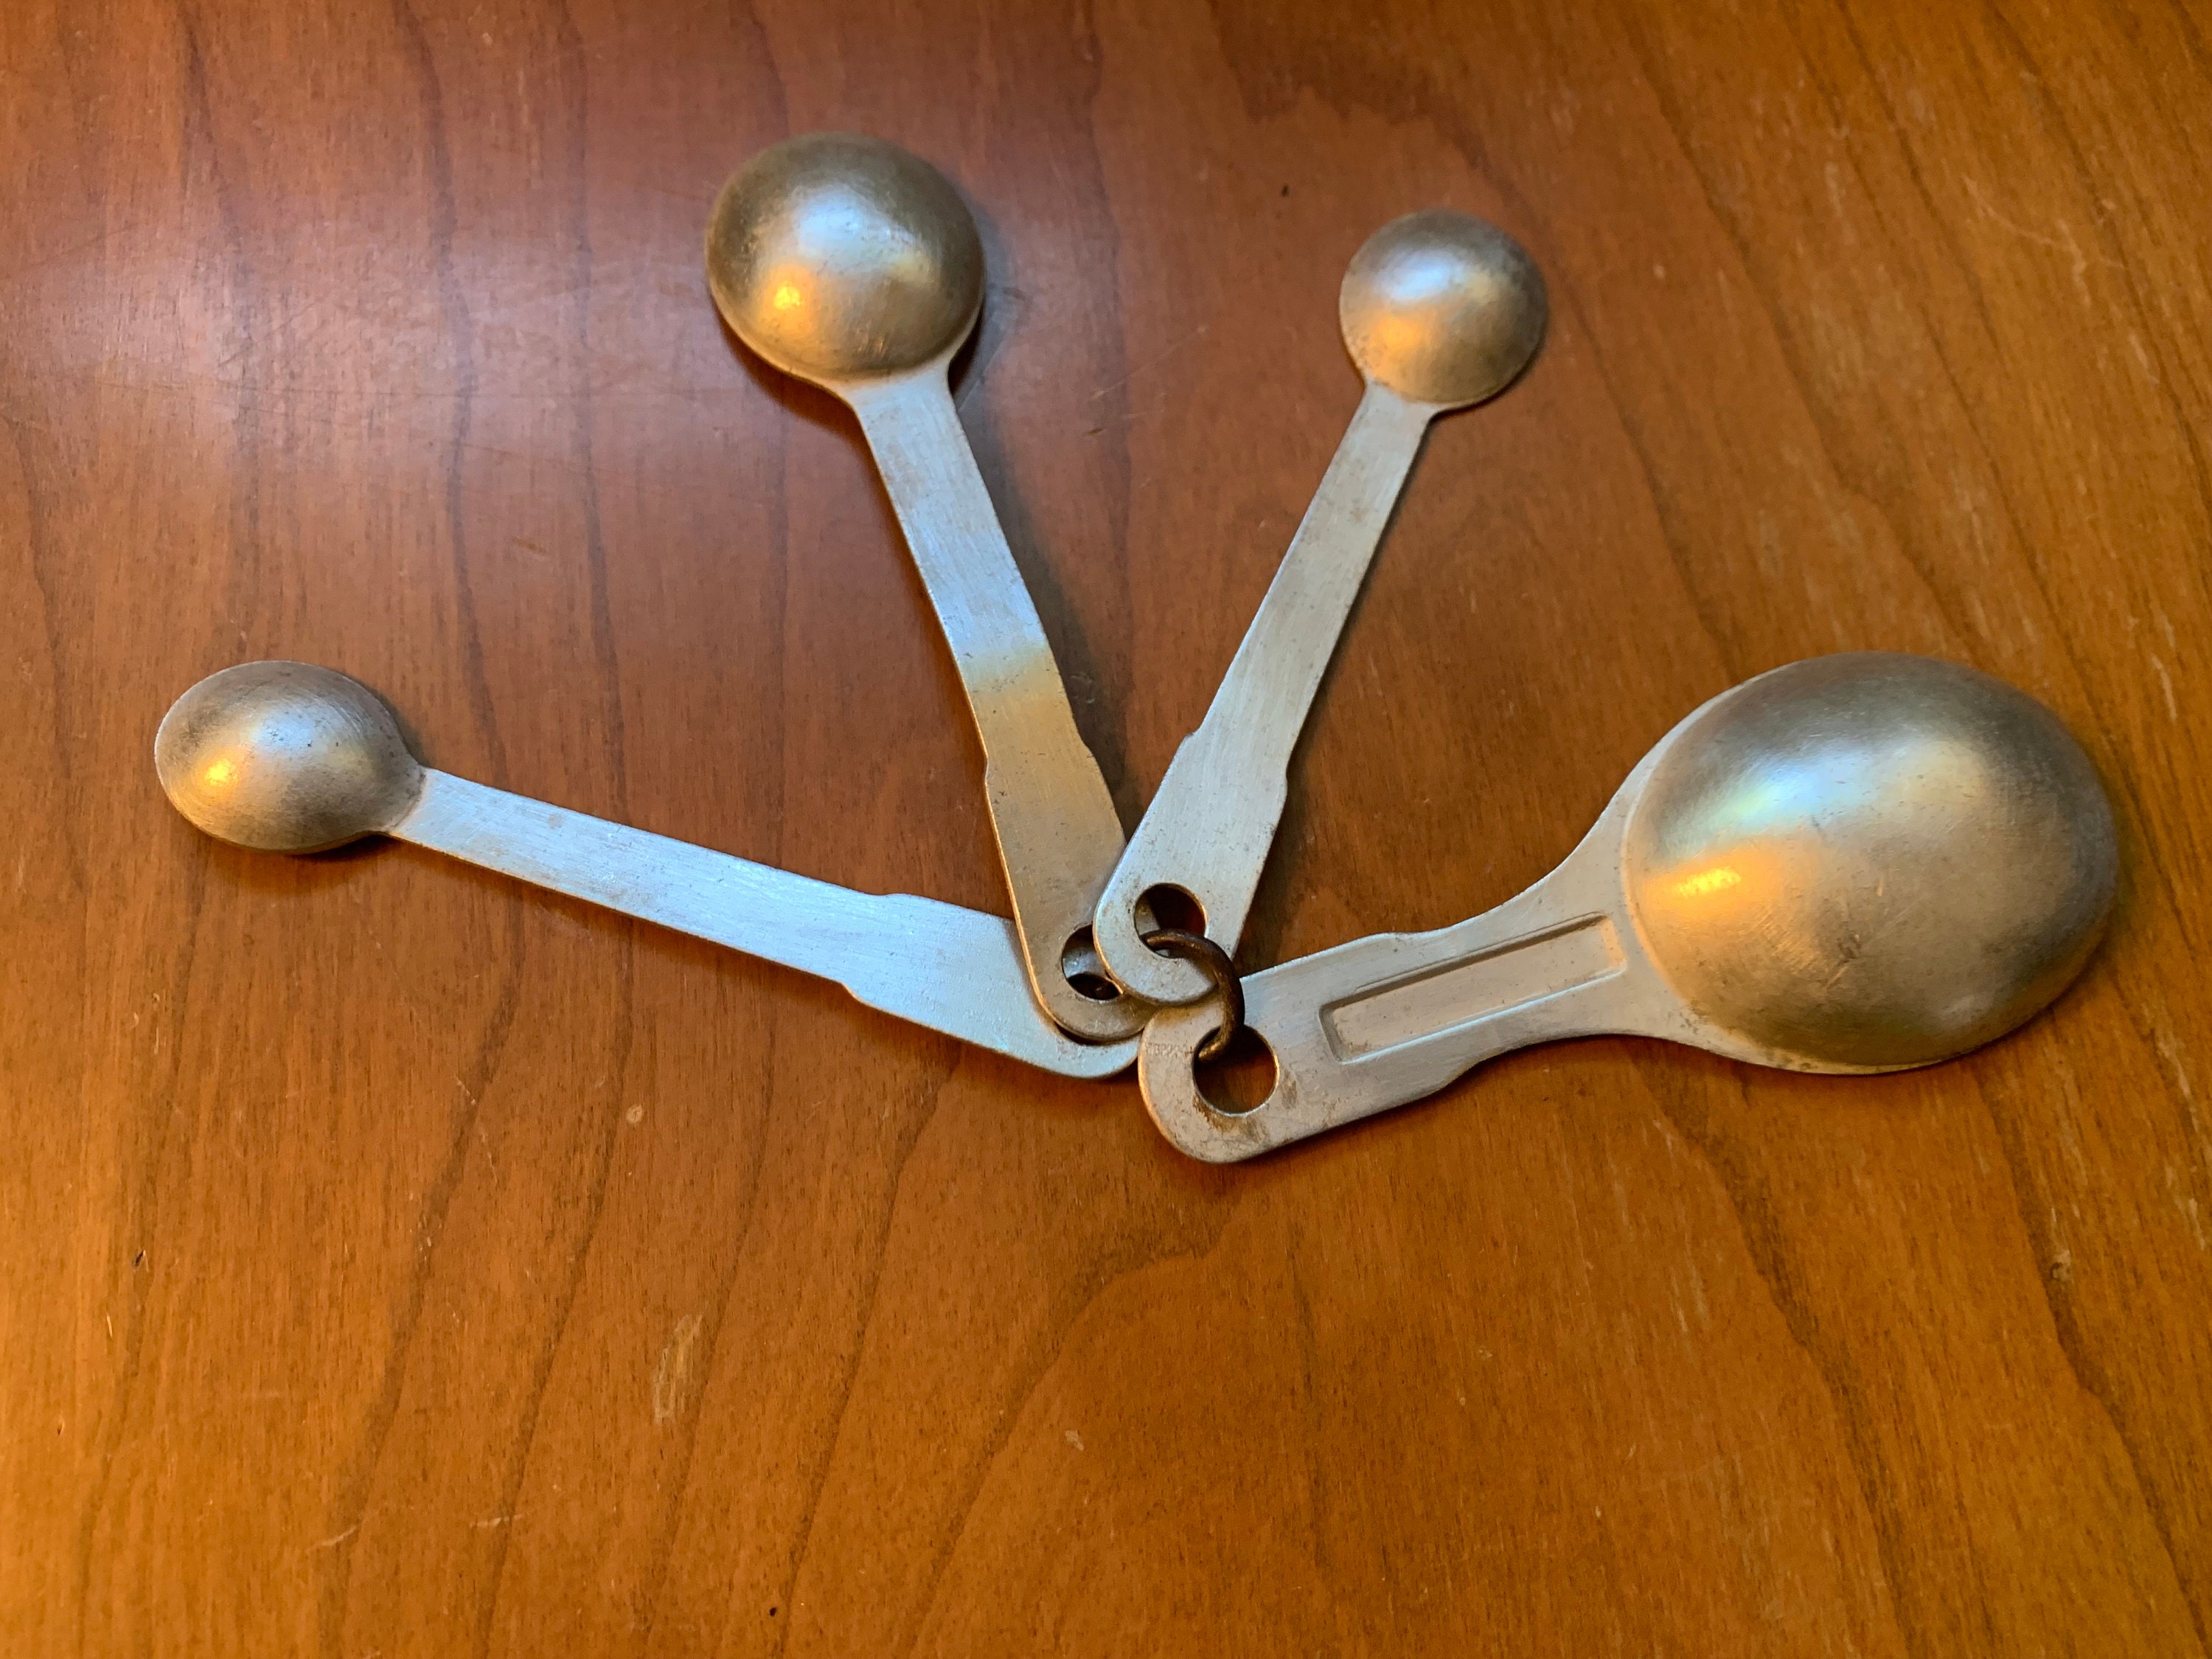 Vintage Aluminum Measuring Cups and Spoons, Circa 1950s, Retro Mid Century  Farmhouse, No Makers Mark, 3 Sets and Odd Spoon, Good Condition 